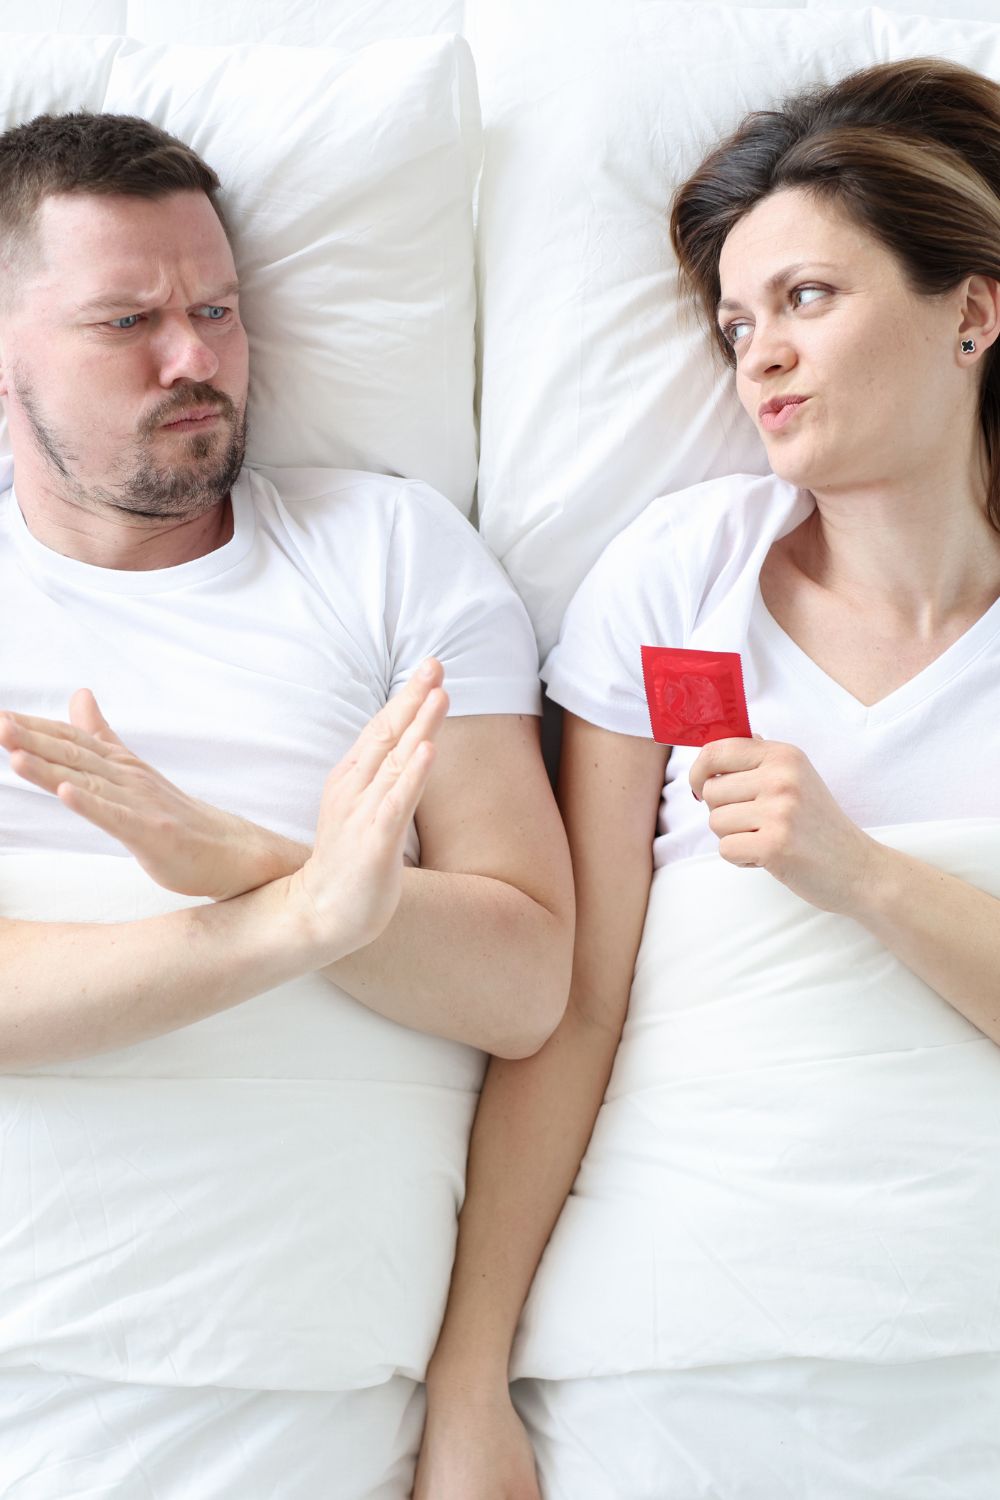 What does it mean if your husband rejects you sexually?